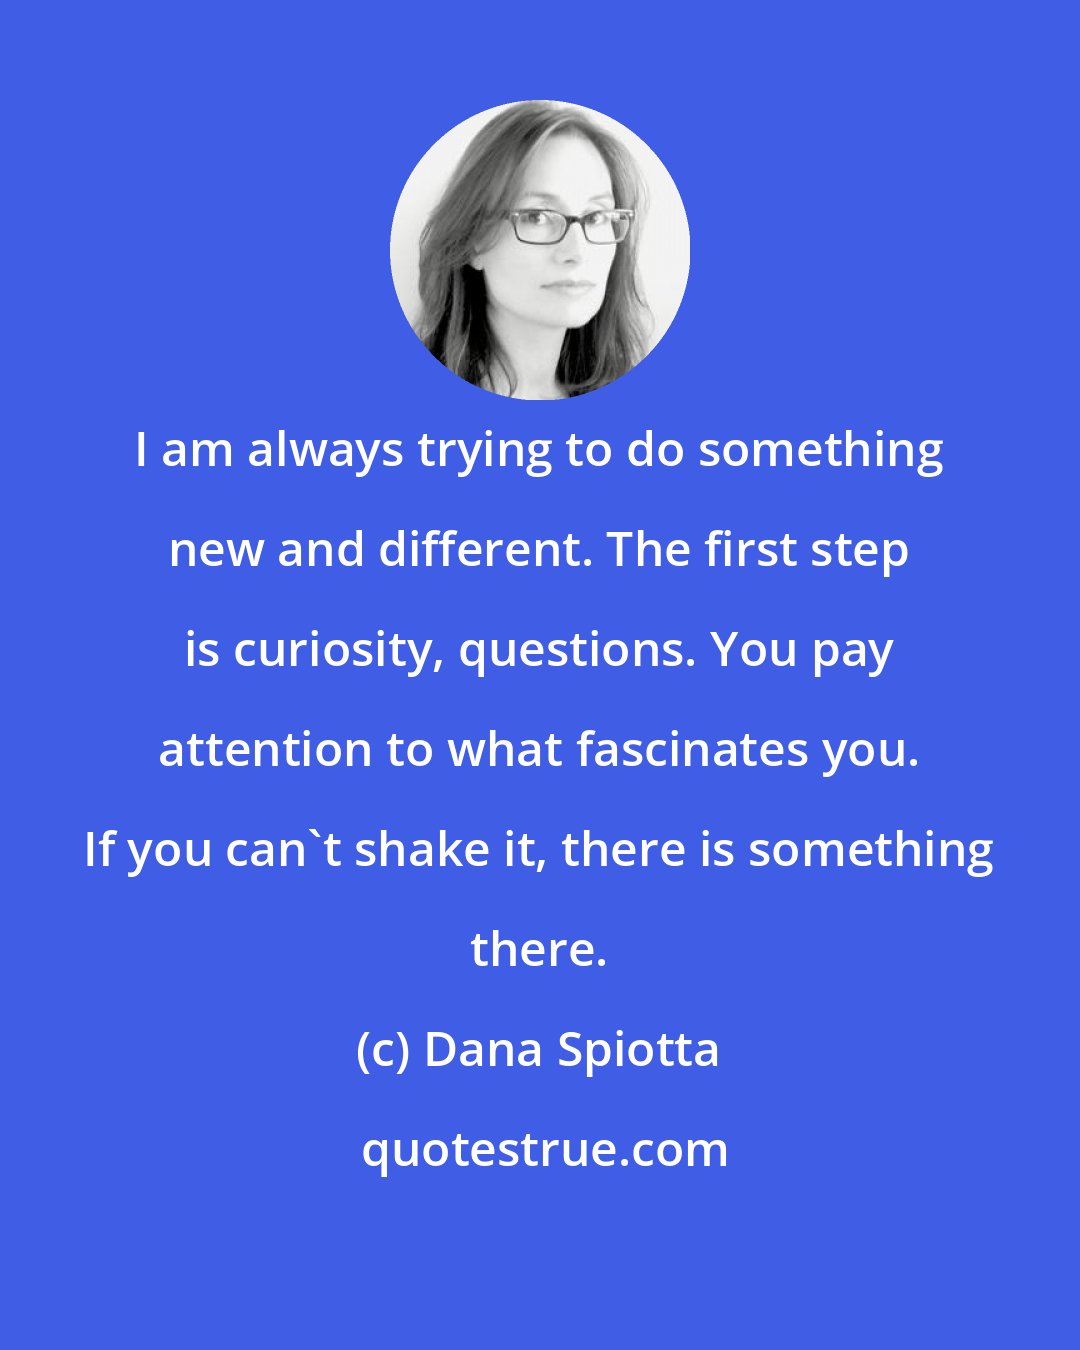 Dana Spiotta: I am always trying to do something new and different. The first step is curiosity, questions. You pay attention to what fascinates you. If you can't shake it, there is something there.